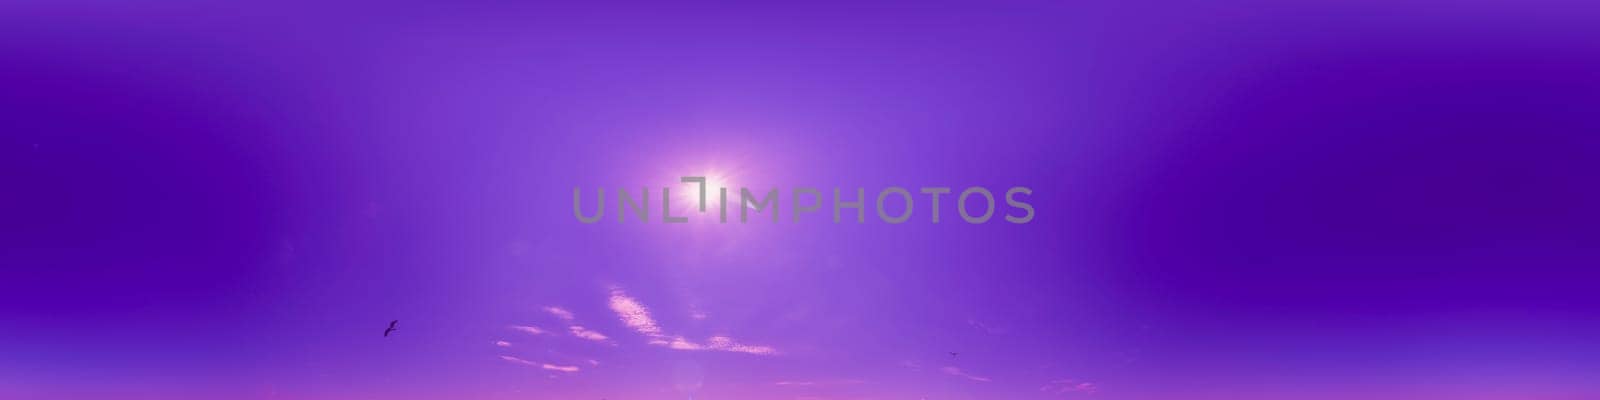 Blue sky panorama with Cirrus clouds in Seamless spherical equirectangular format. Full zenith for use in 3D graphics, game and editing aerial drone 360 degree panoramas for sky replacement. by Matiunina